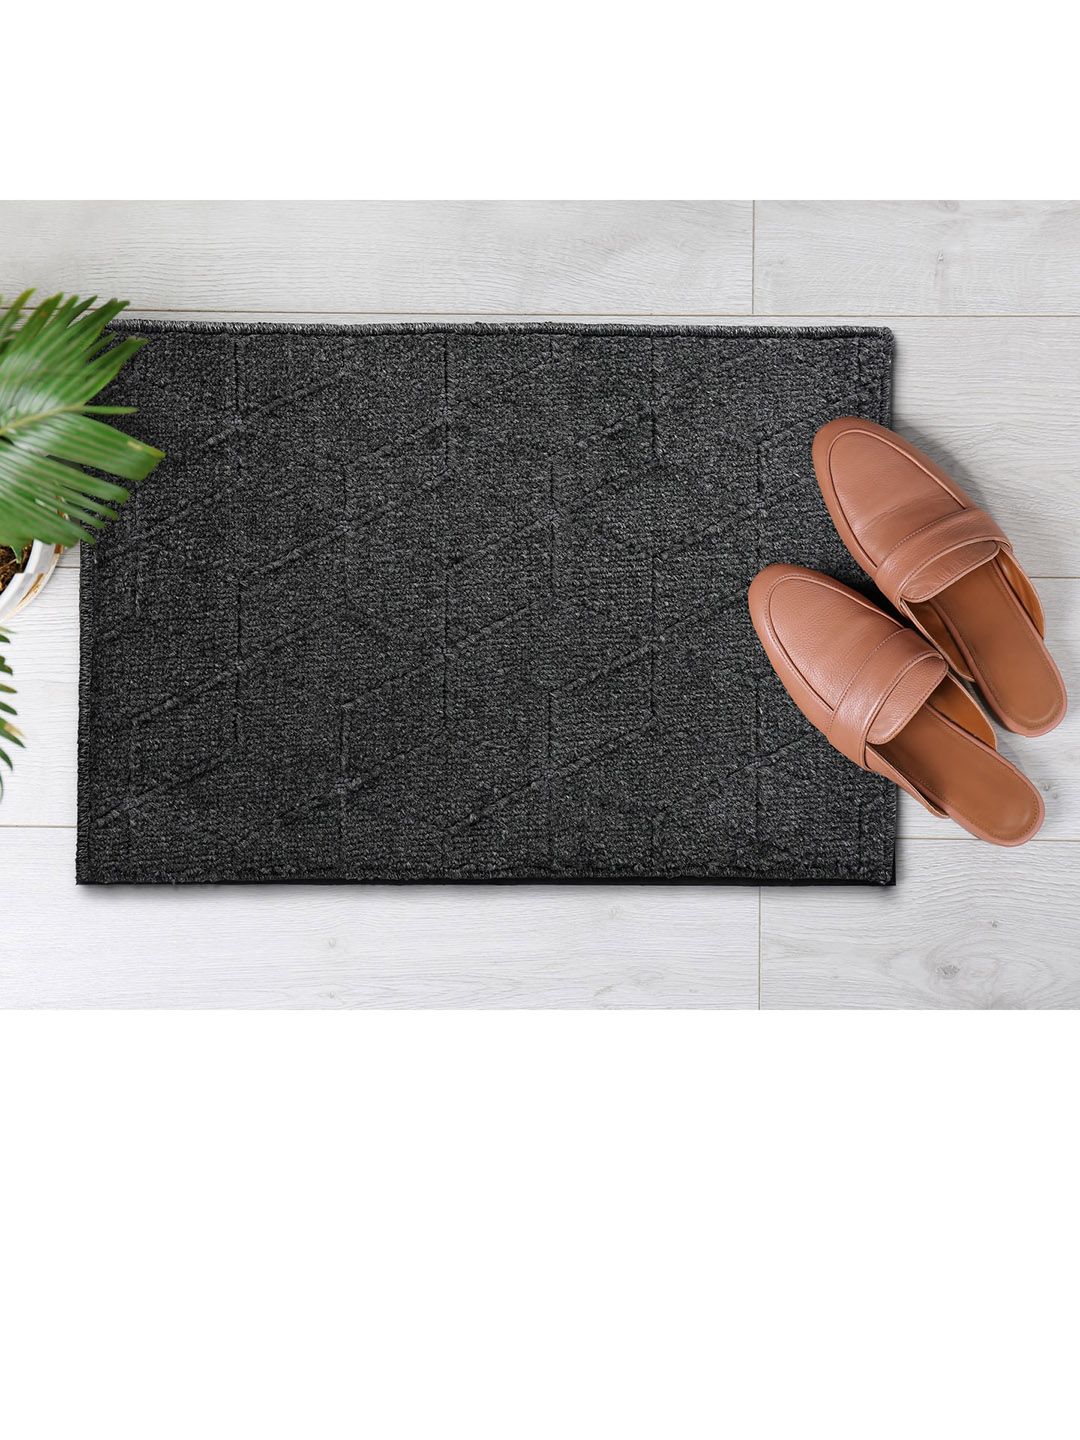 Saral Home Black Solid Cotton Anti-Skid Doormats Price in India